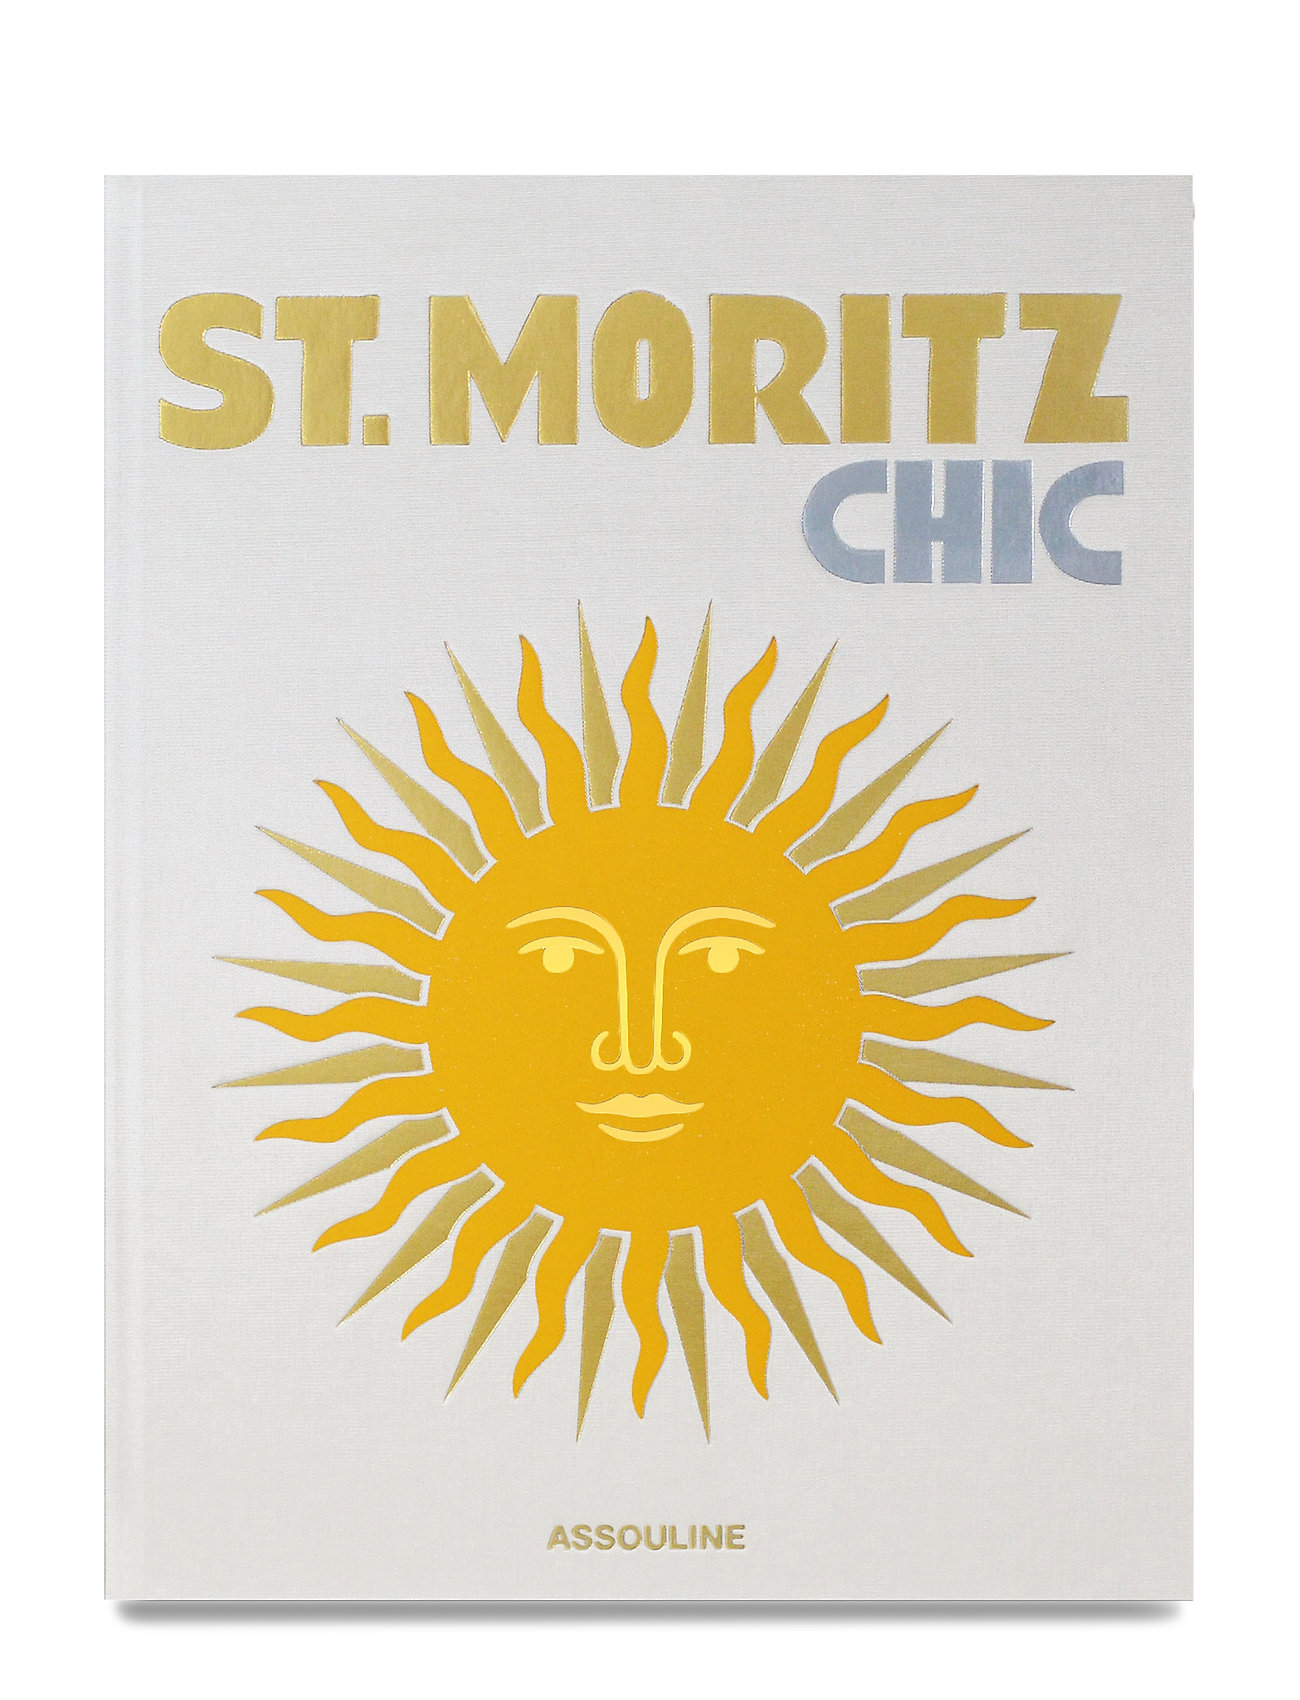 St. Moritz Chic Home Decoration Books Multi/patterned New Mags